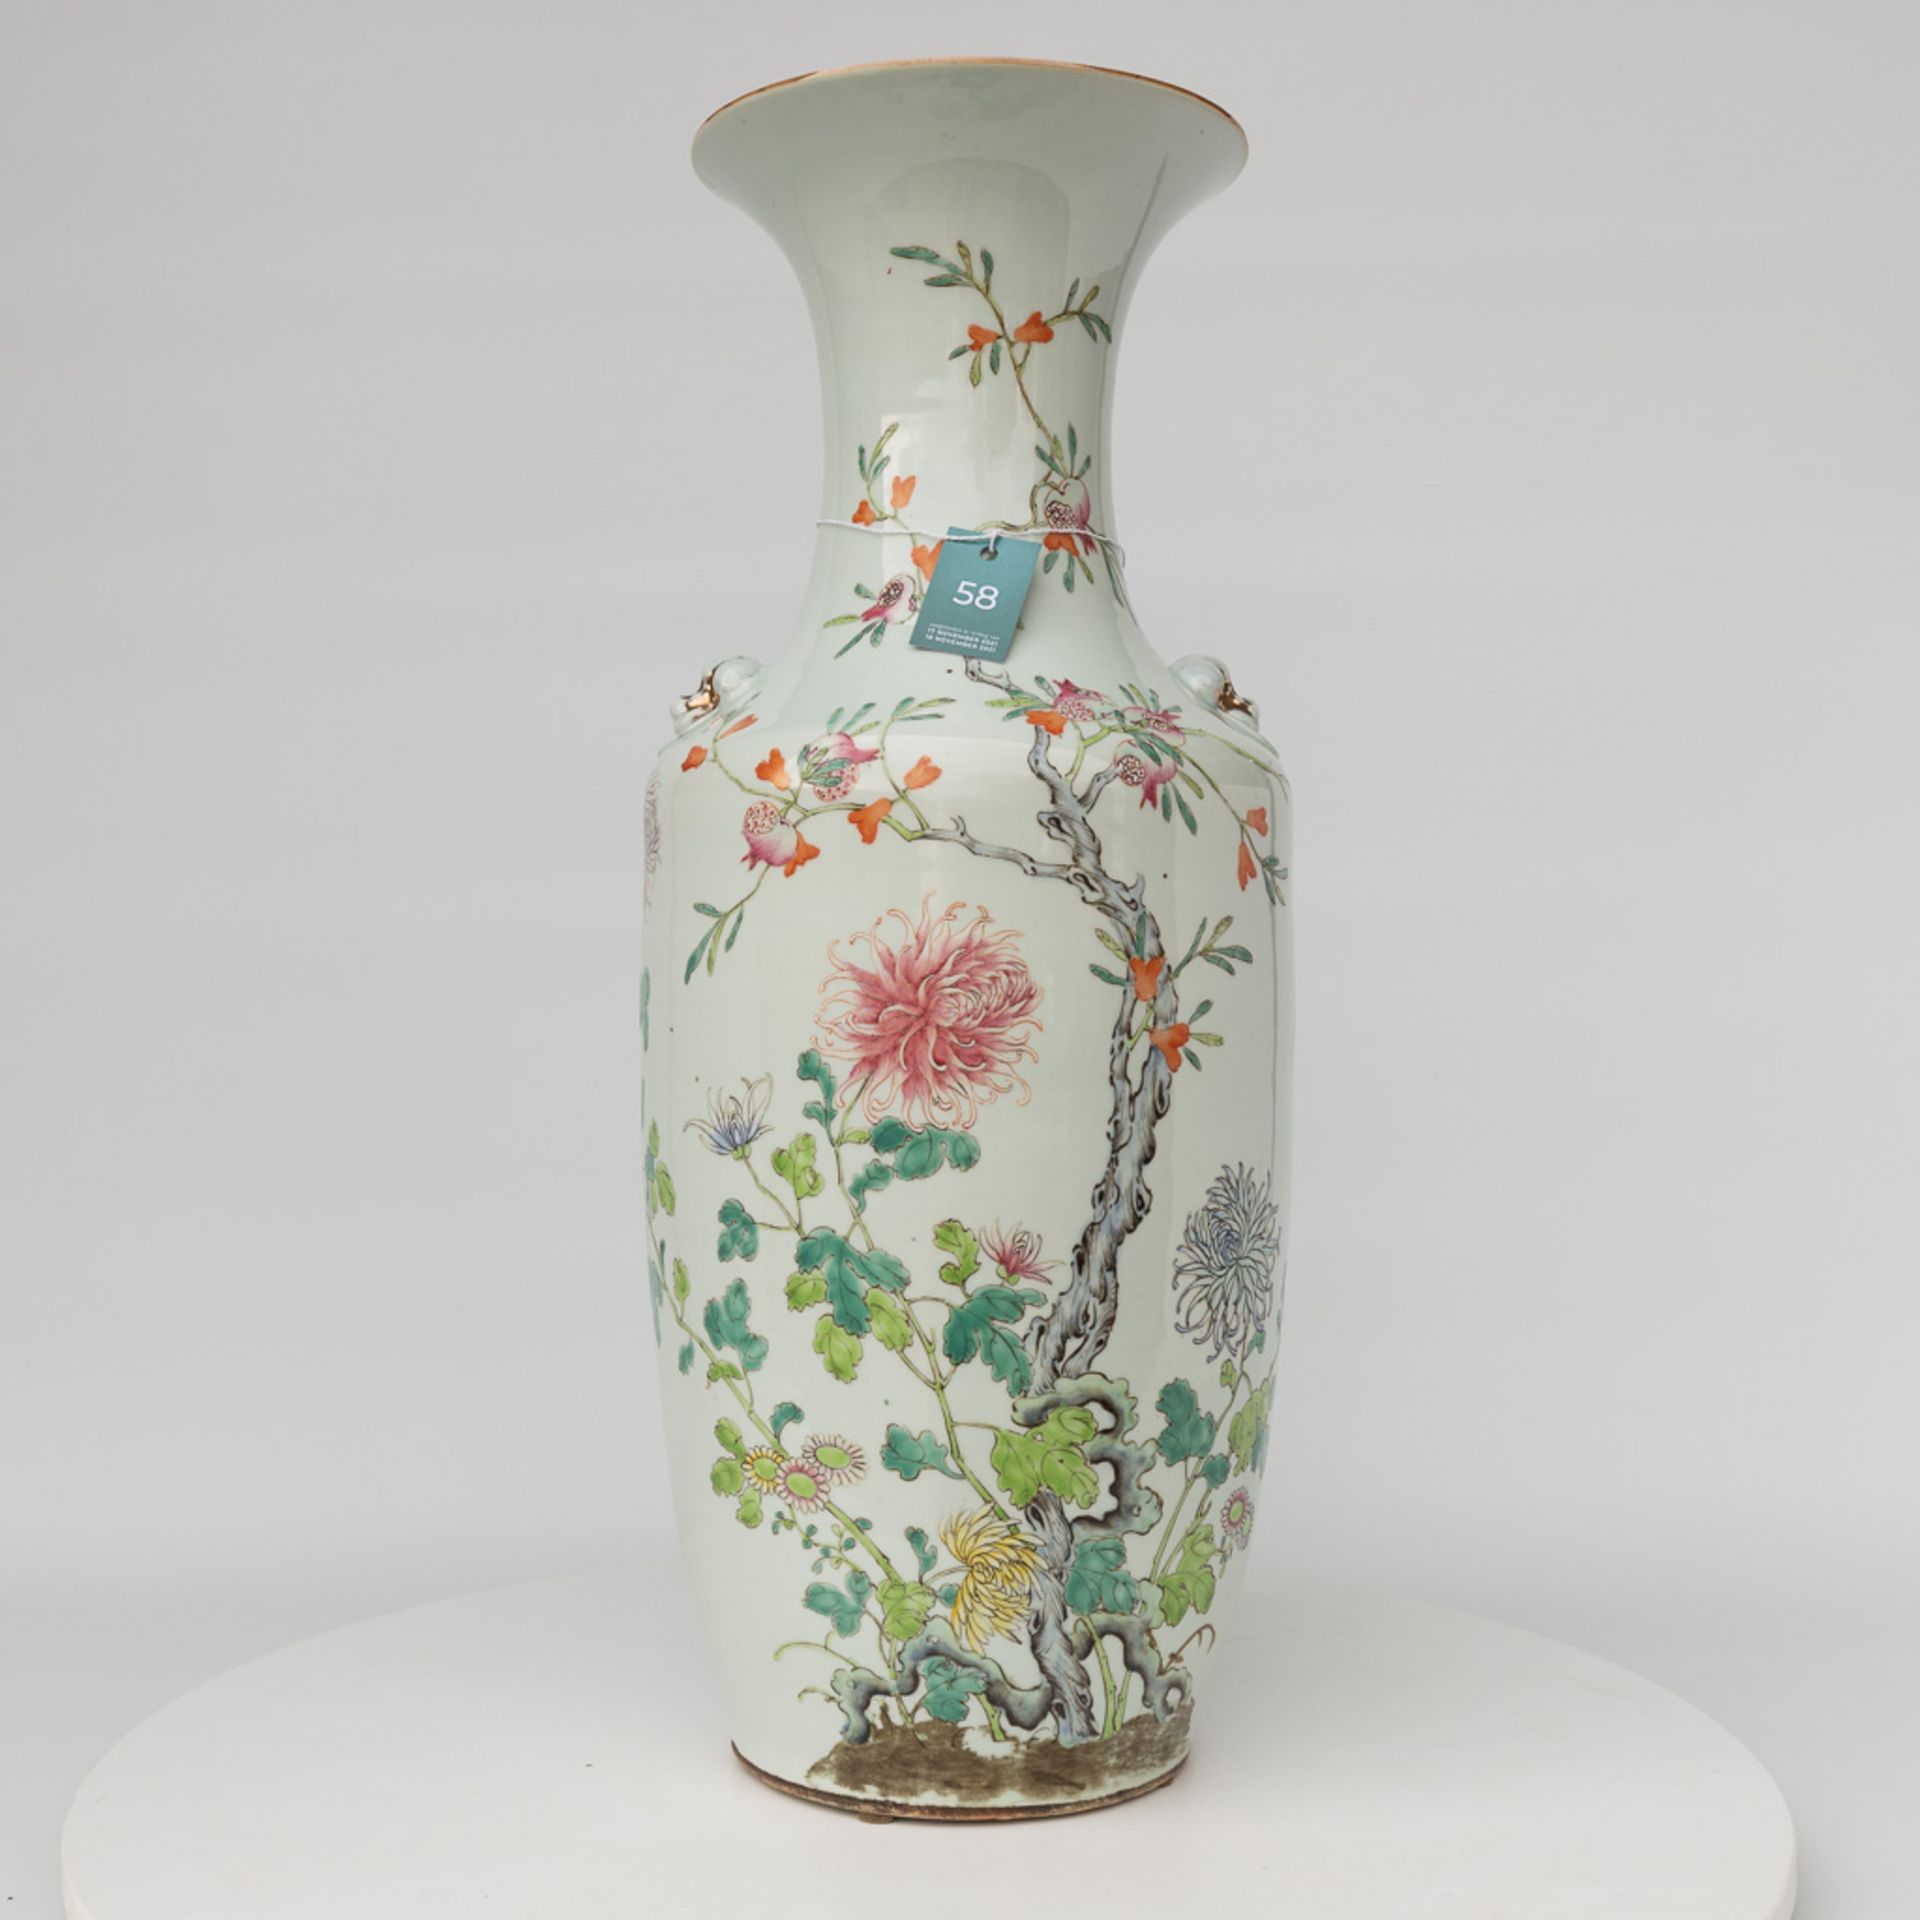 A vase made of Chinese porcelain and decorated with roses and bats. 19th century. - Image 13 of 13